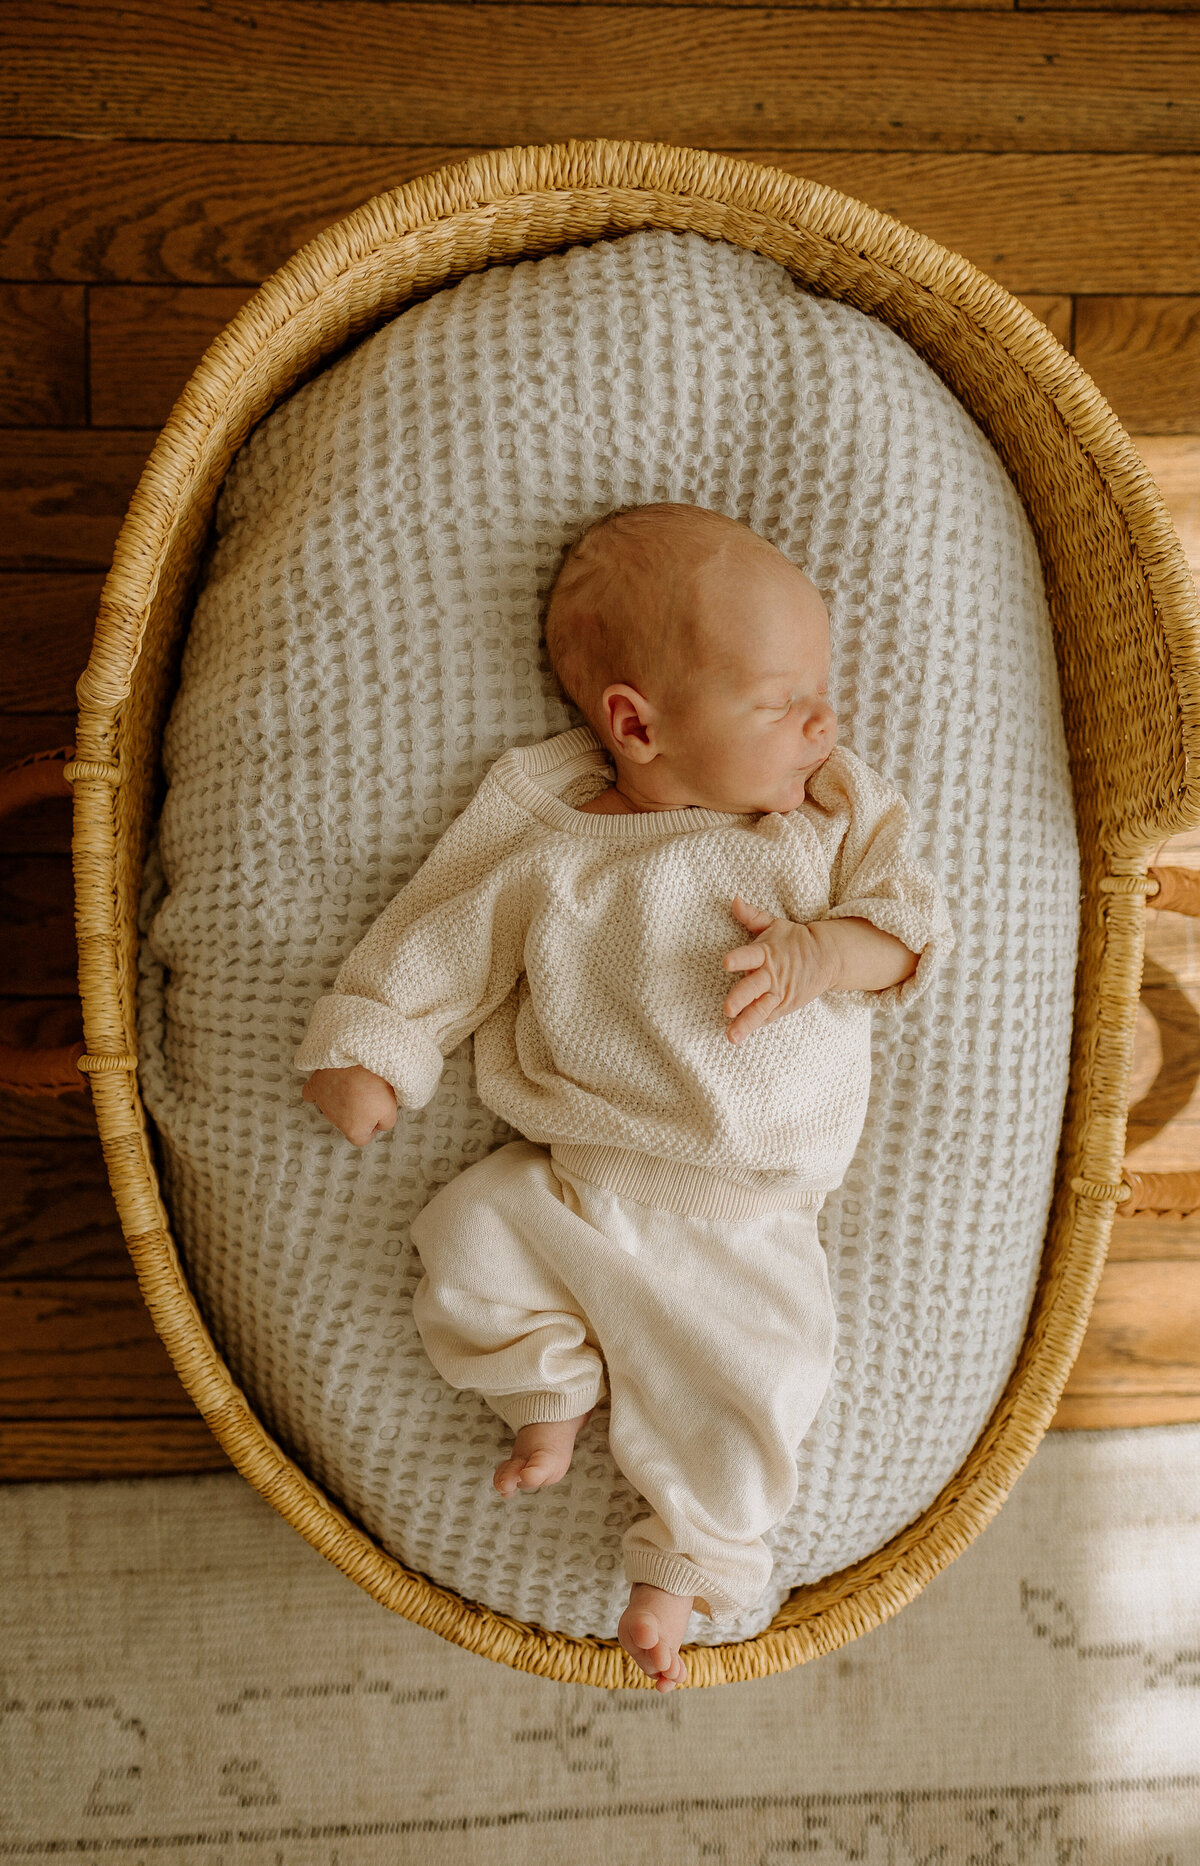 My Calgary newborn portraits are a timeless keepsake of your little one's earliest days. Experience the tenderness, joy, and connection within each image.